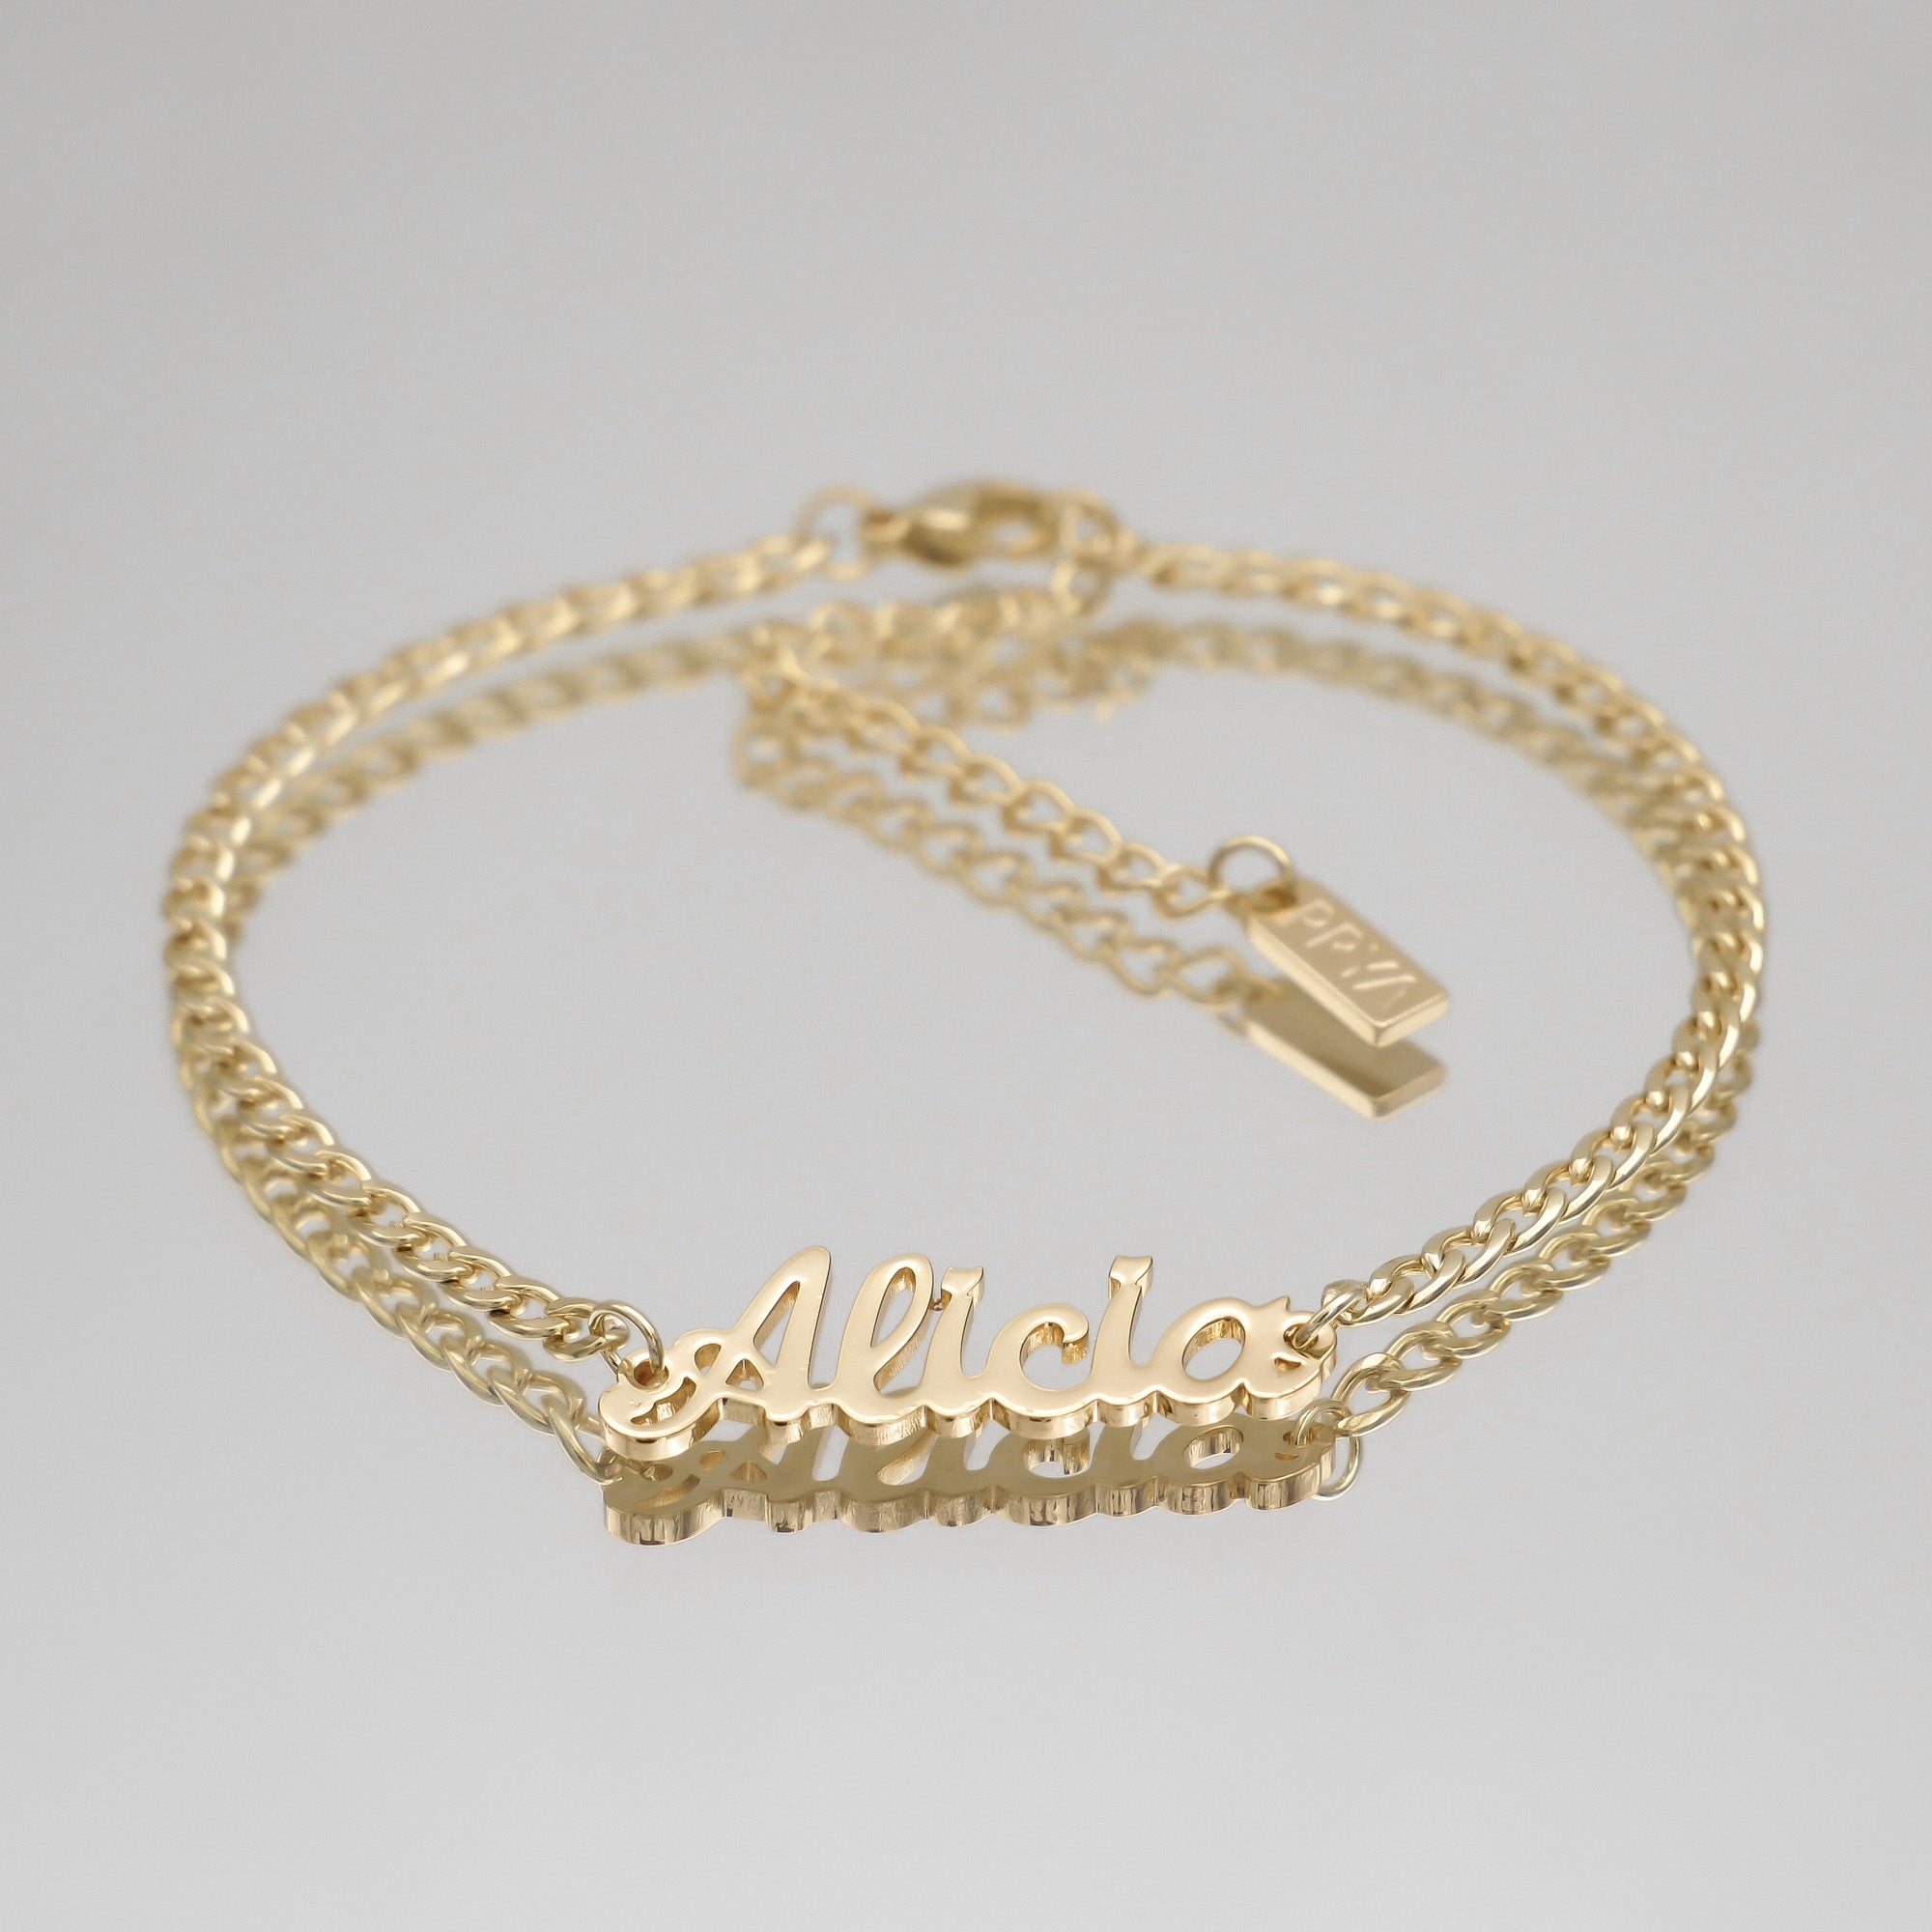 Gold Miami customised name anklet with Cuban chain